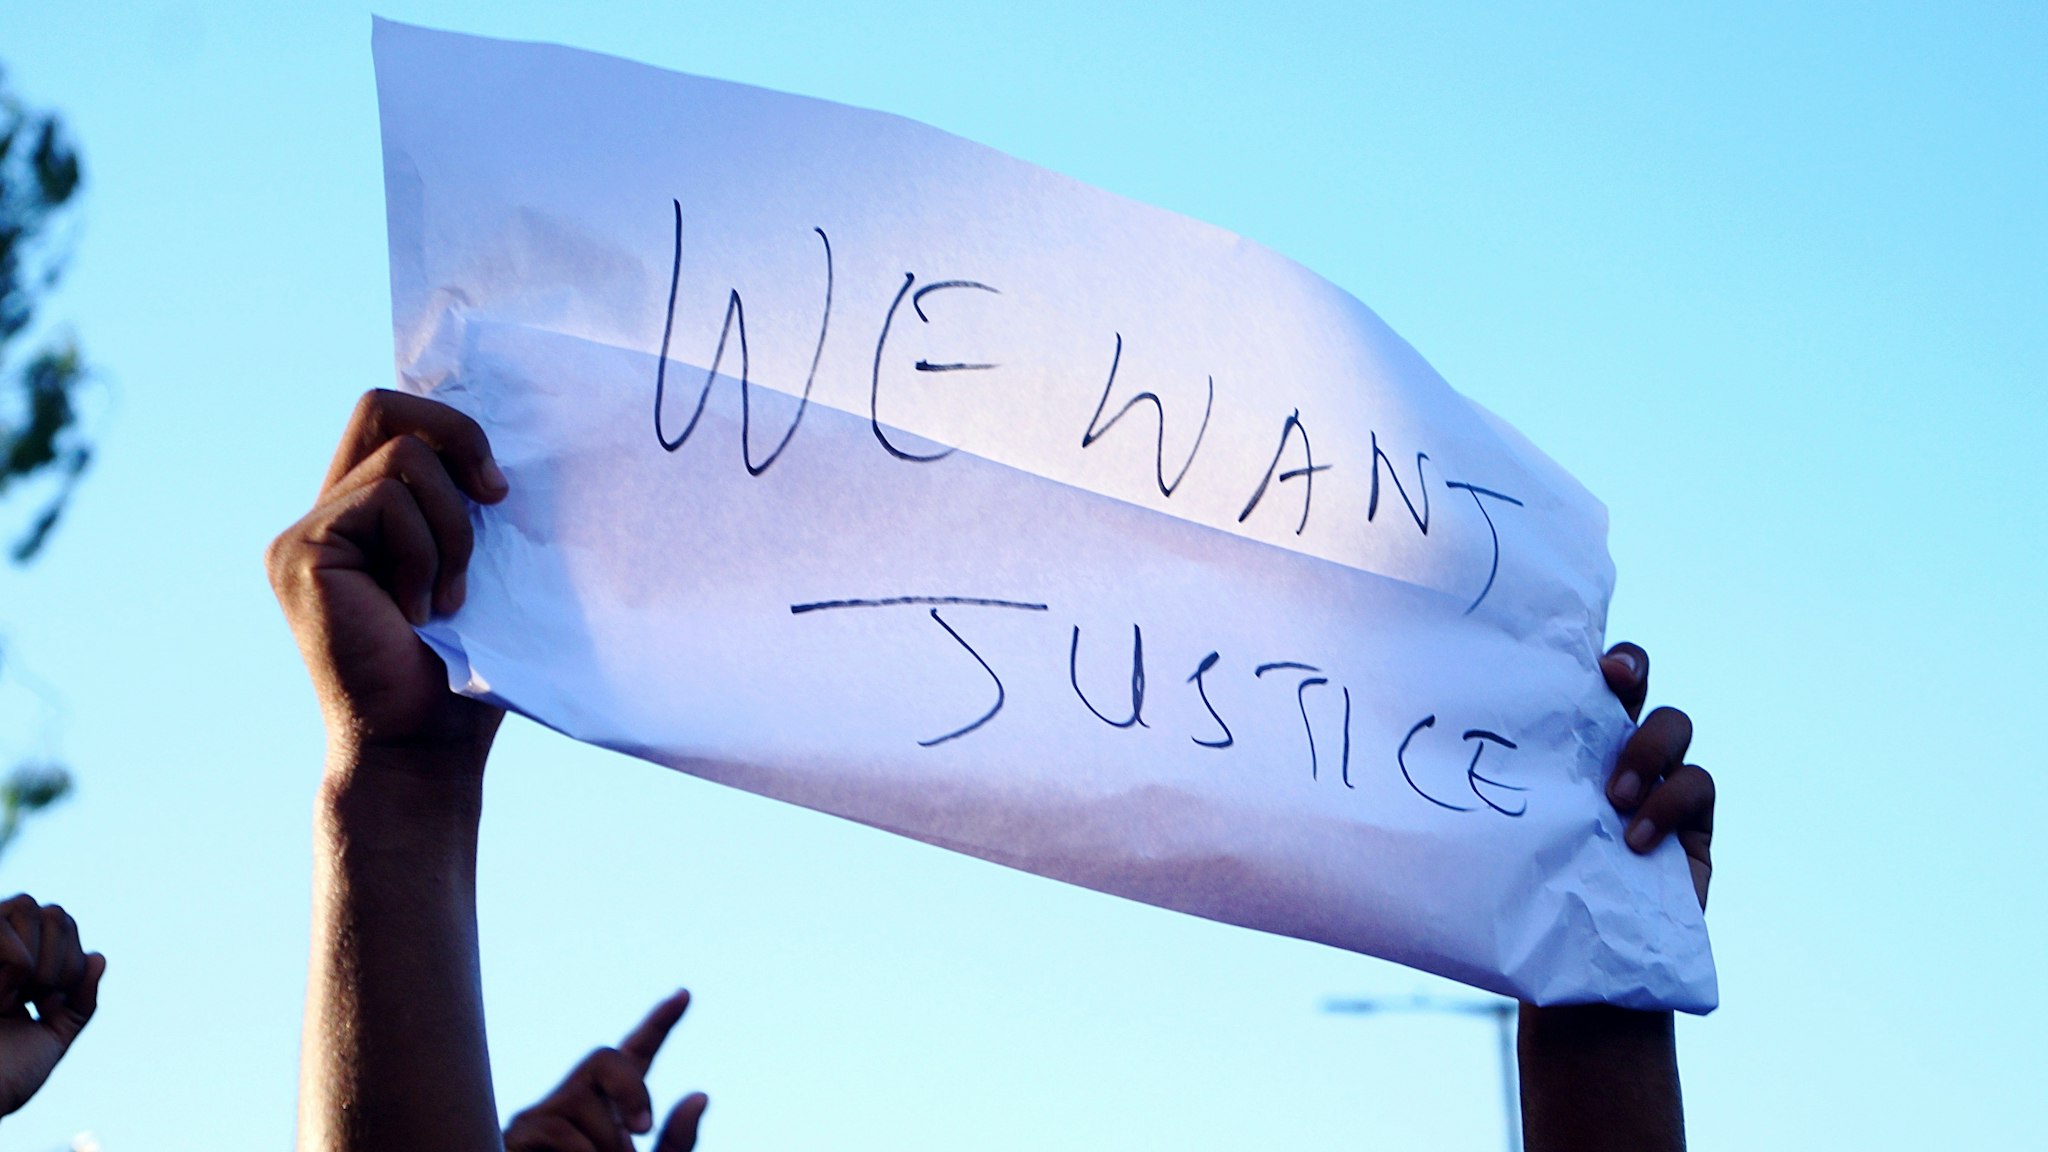 Low Angle View Of Person Holding Paper With Justice Text Against Sky - stock photo